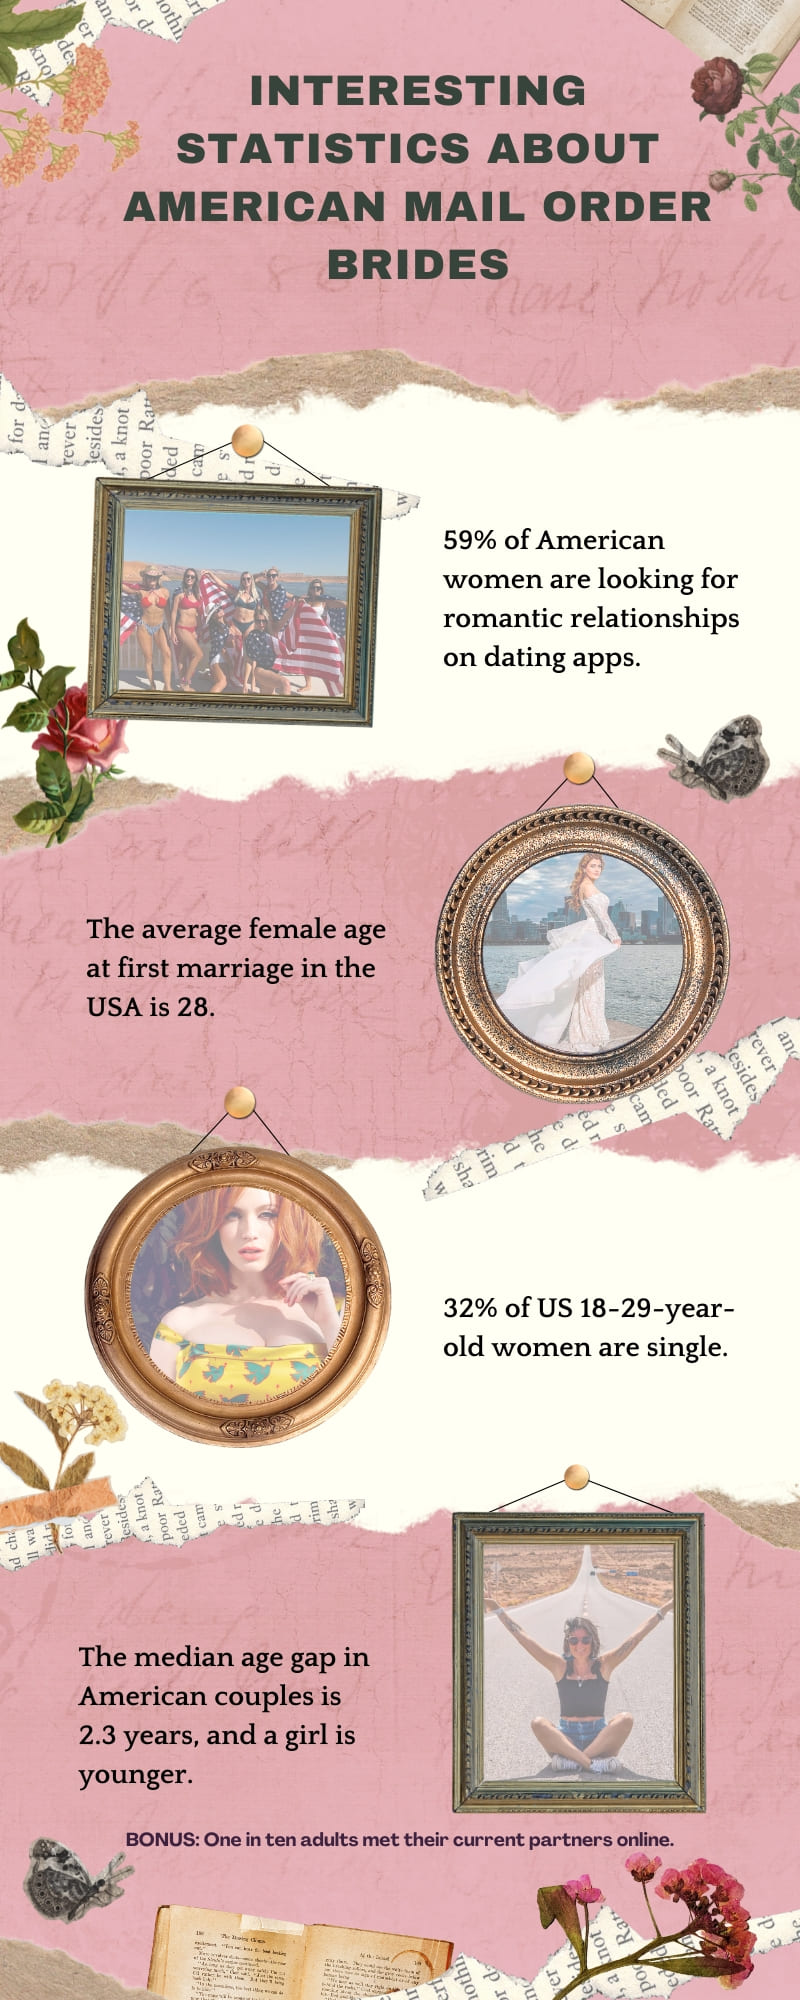 Interesting statistics about American mail order brides